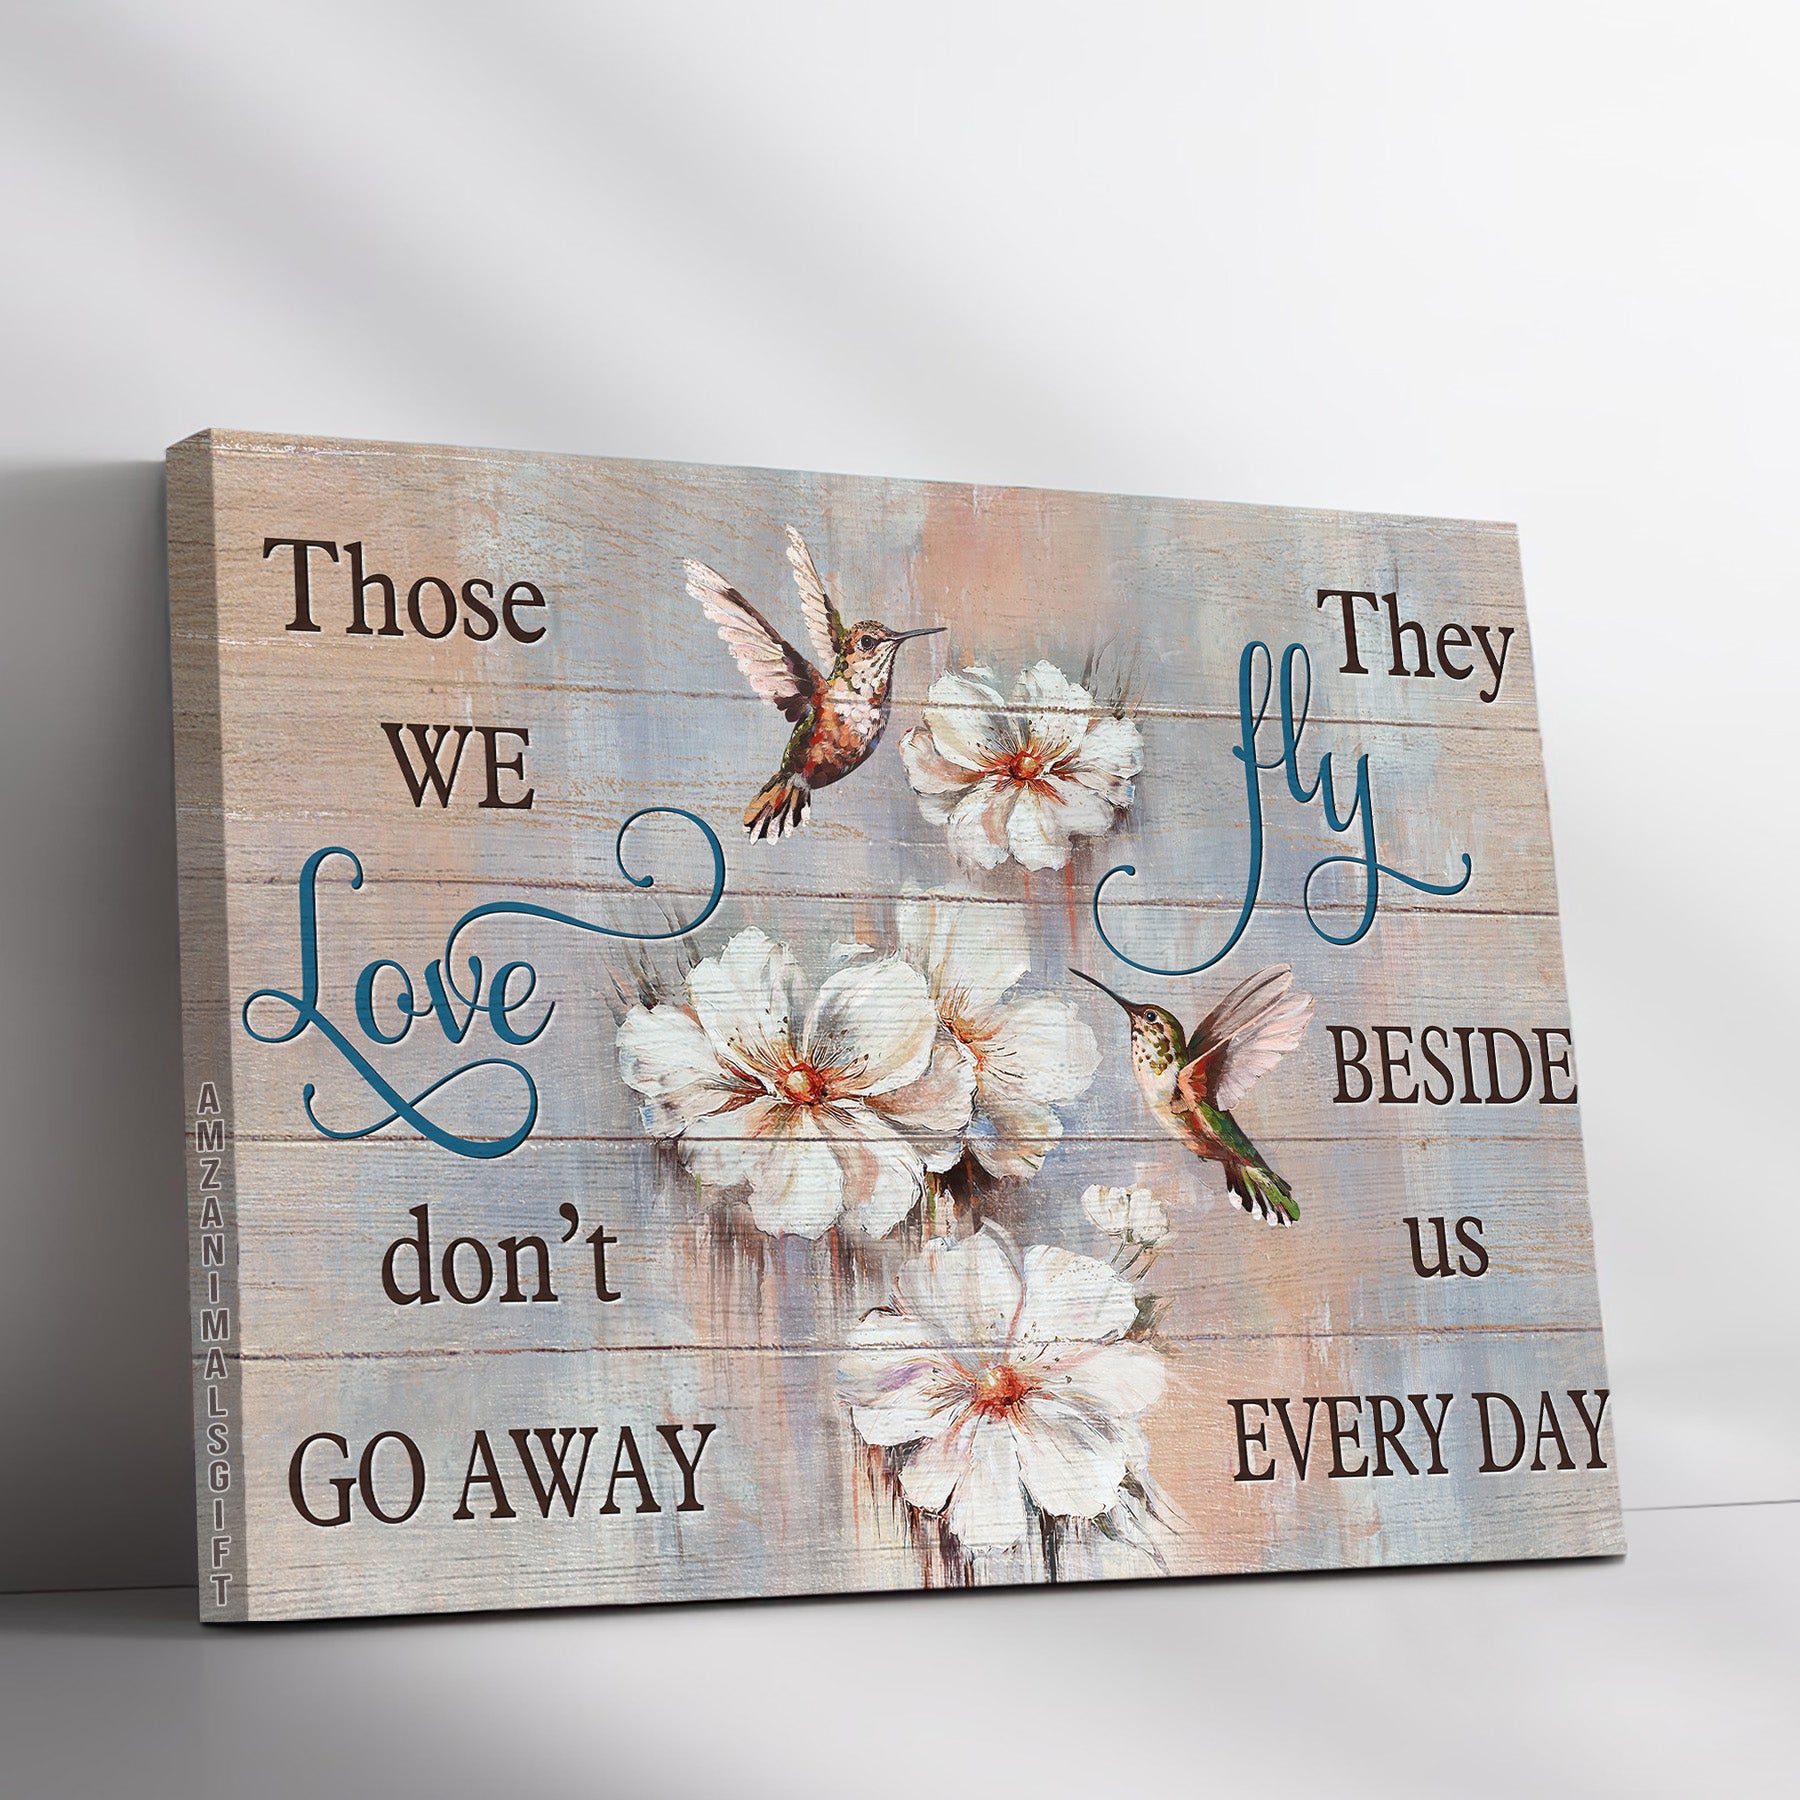 Memorial Premium Wrapped Landscape Canvas - White Climbing Rose, Watercolor Hummingbird, Those We Love Don't Go Away - Heaven Gift For Members Family